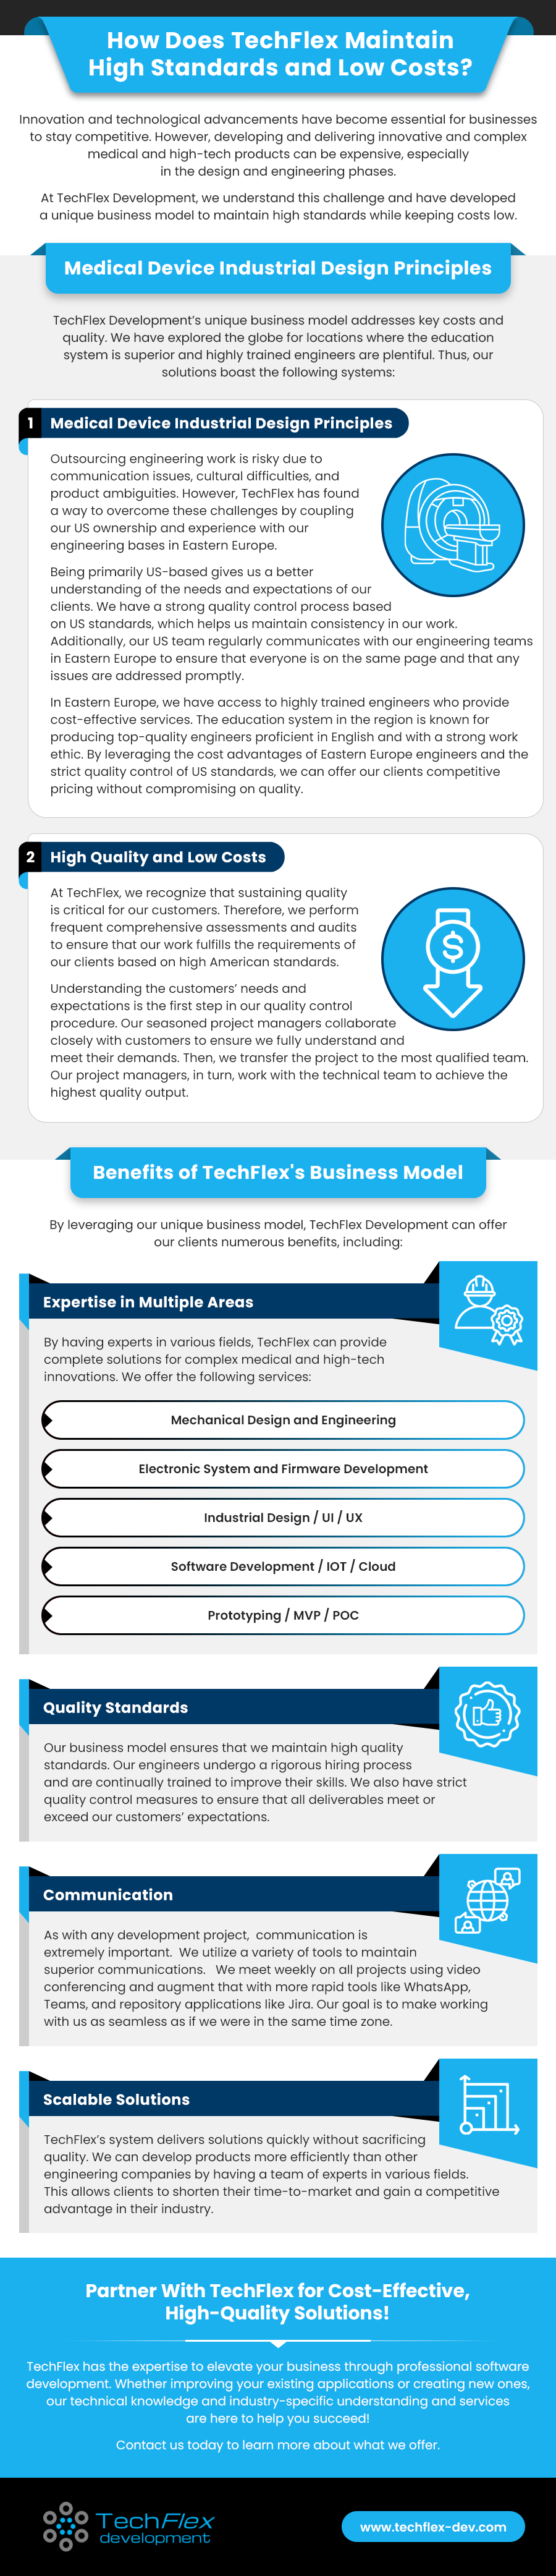 How-Does-TechFlex-Maintain-High-Standards-and-Low-Costs